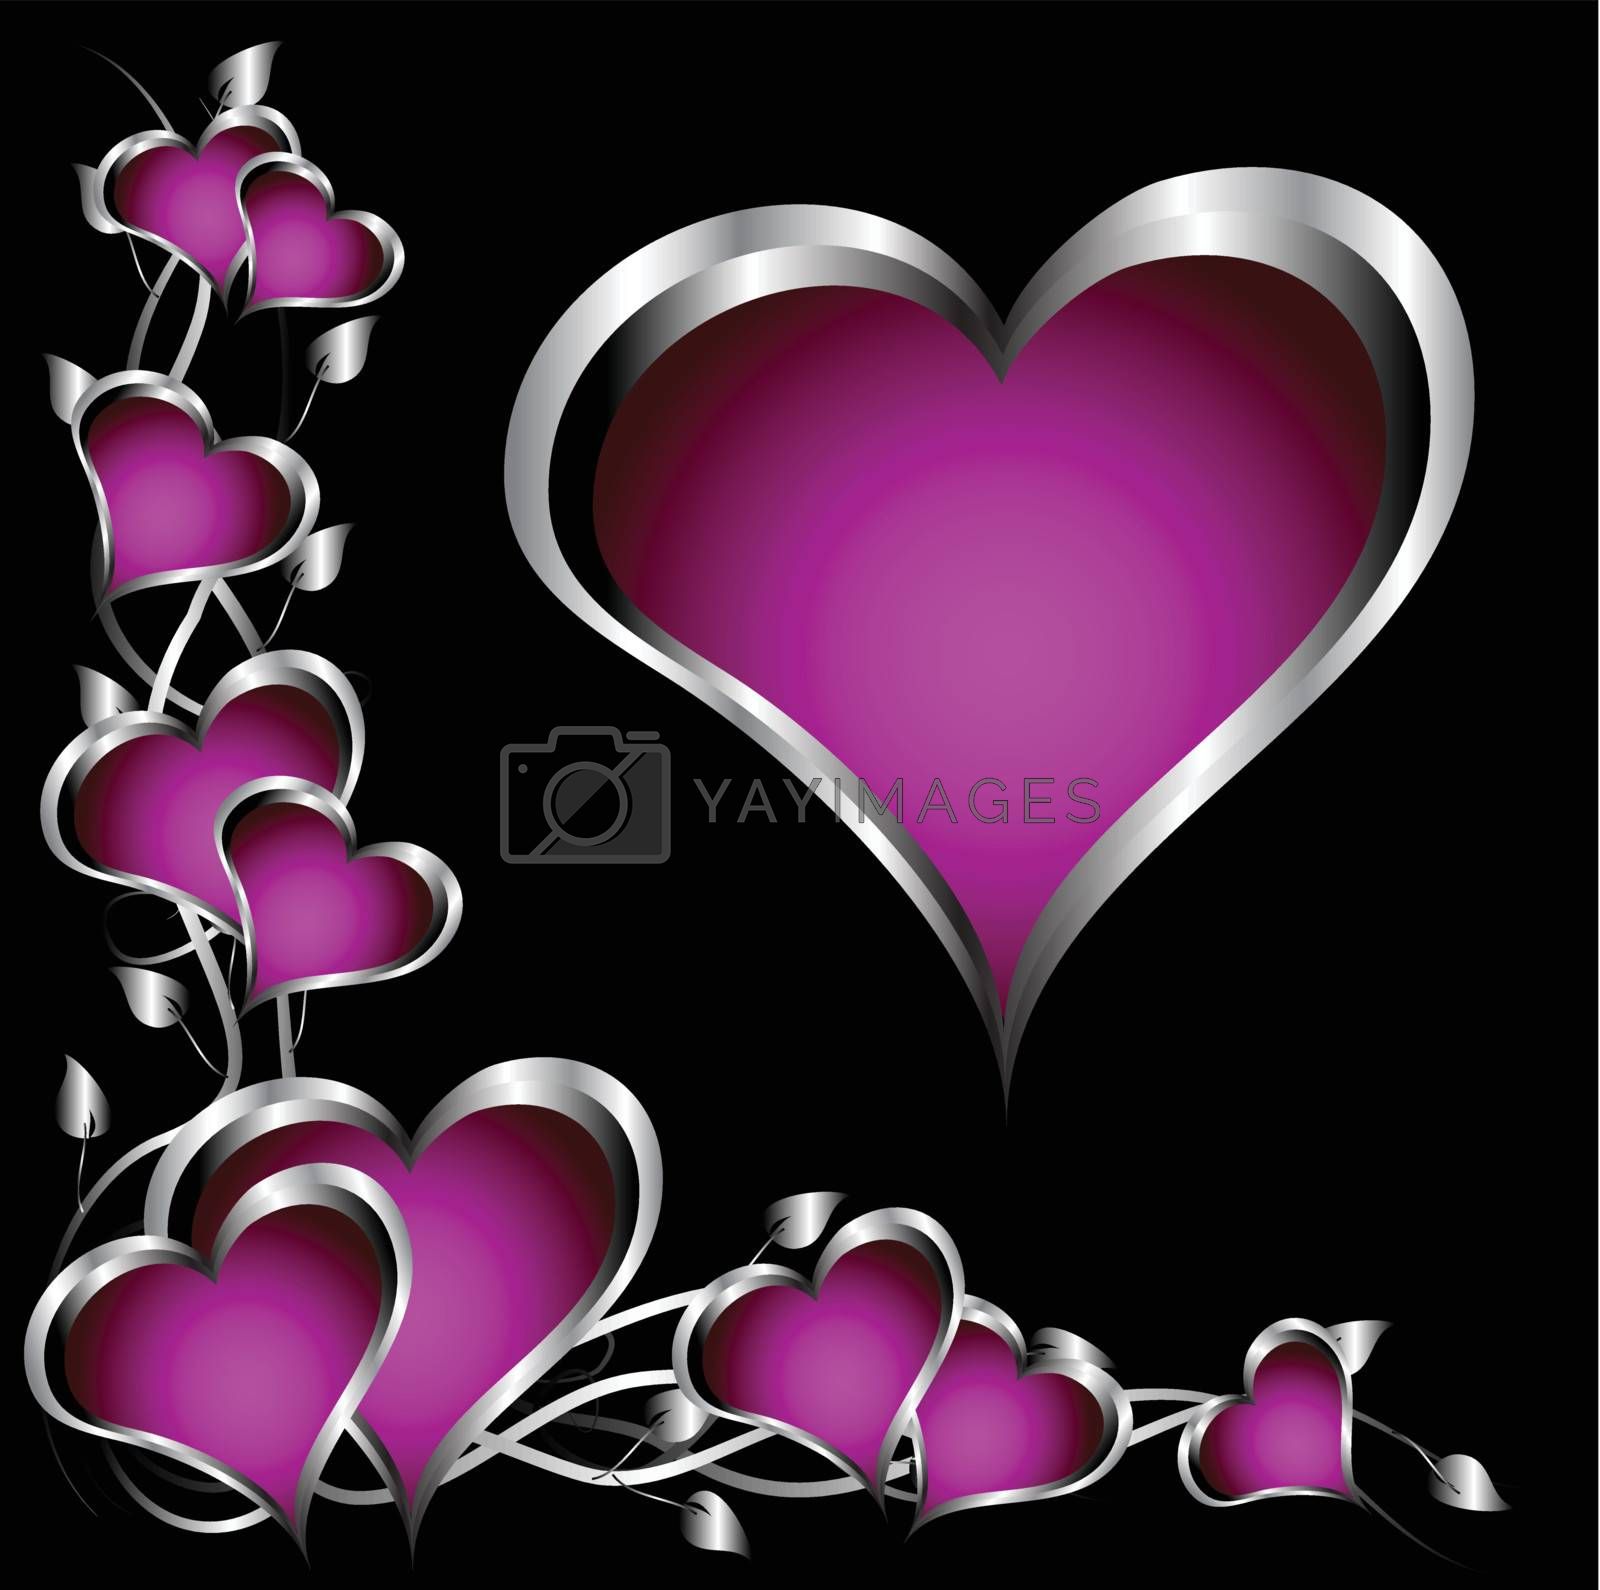 Royalty Free Vector. A purple hearts Valentines Day Background